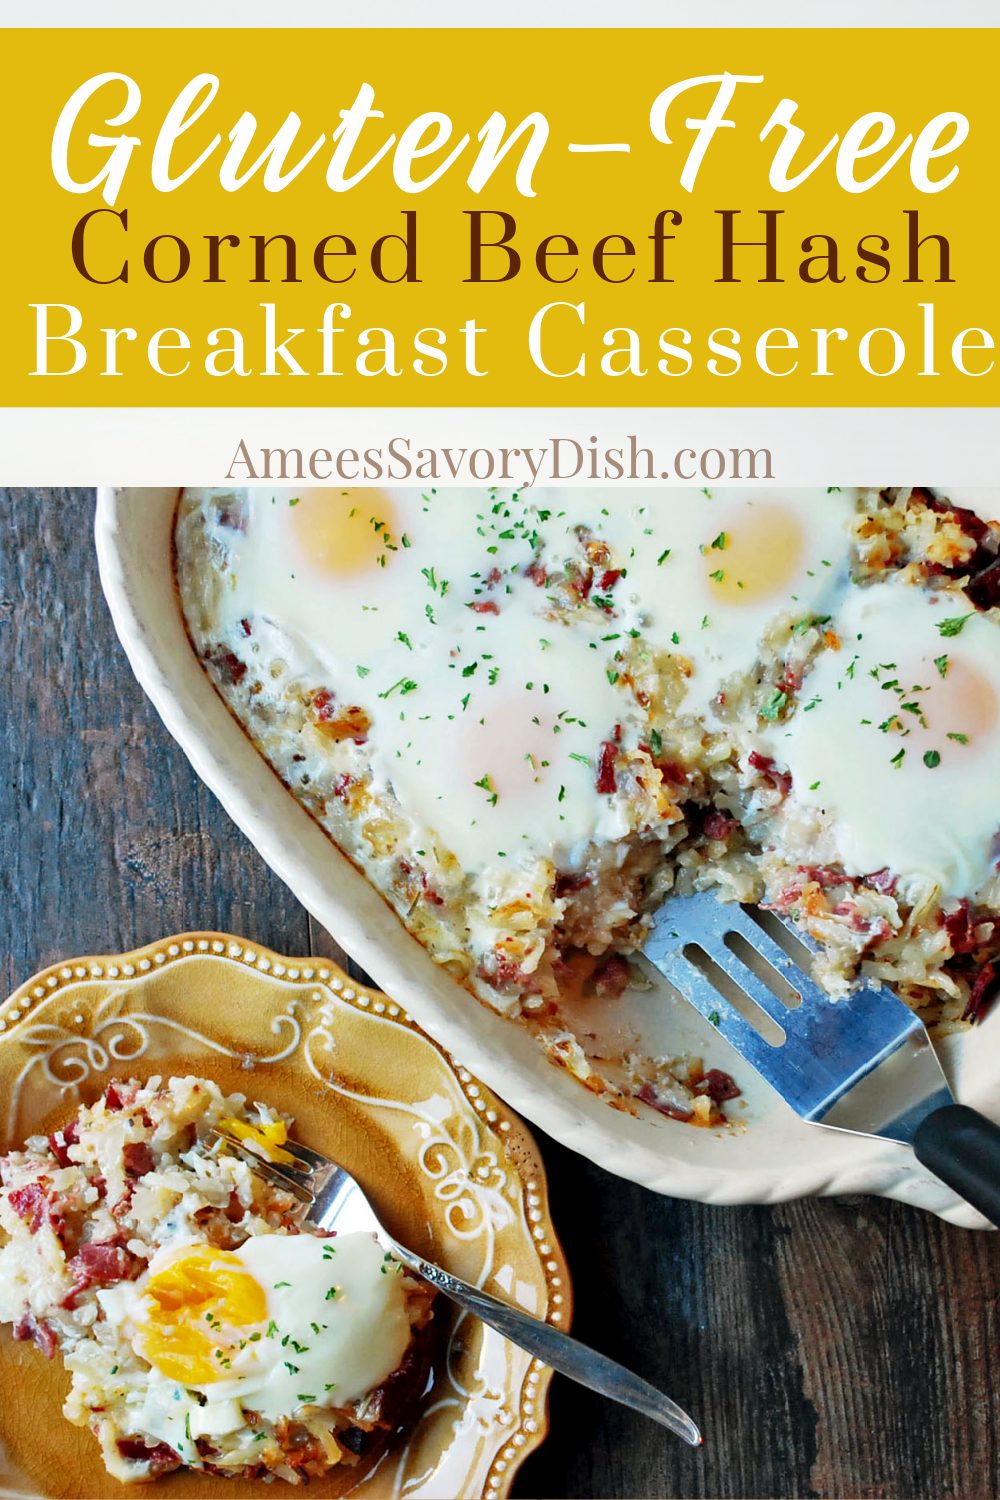 This lightened-up and delicious Corned Beef Hash Breakfast Casserole is a combination of cheese, hashbrown potatoes, corned beef, fresh herbs, and eggs. #breakfastcasserole #cornedbeefrecipe #cornedbeefhash #eggcasserole via @Ameessavorydish